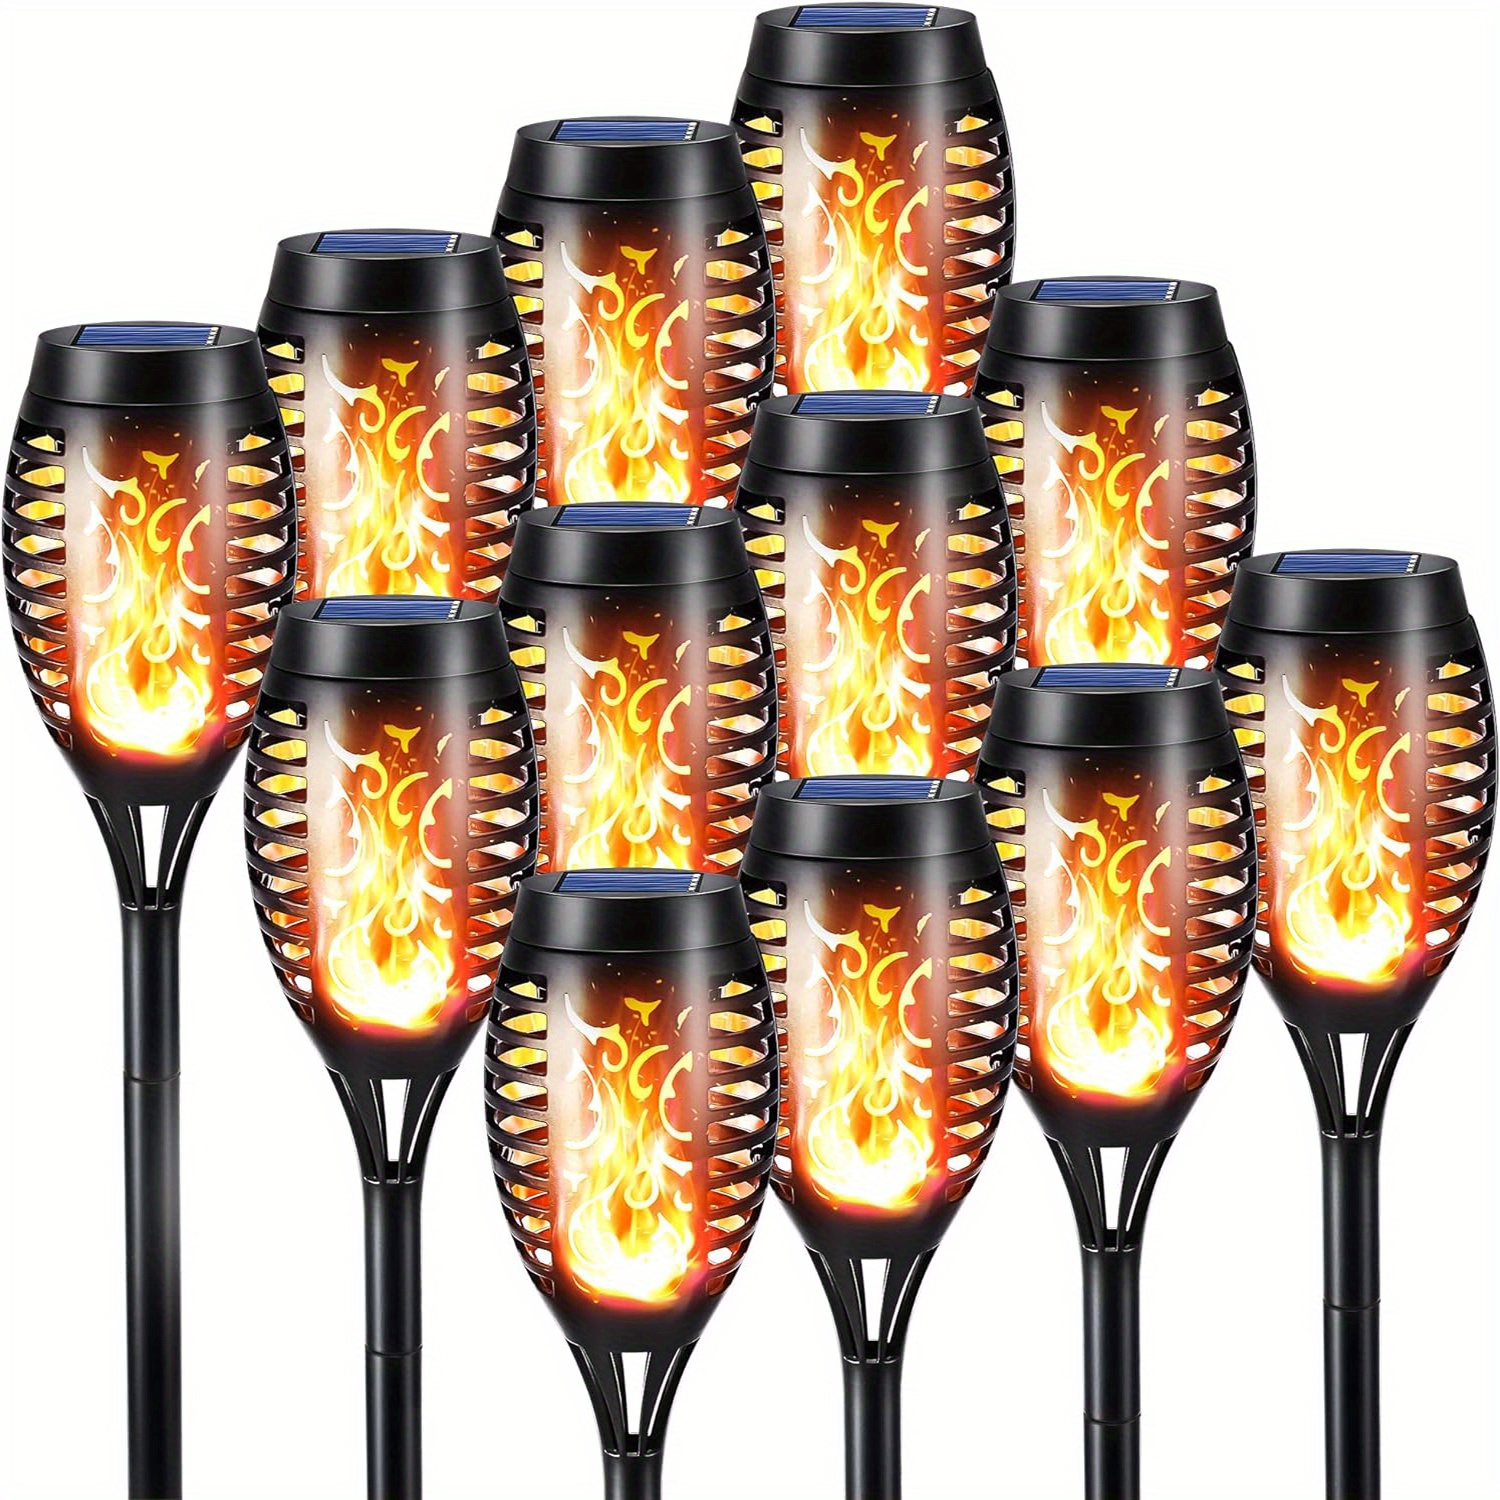 

12 Pack Solar Torch Flame Lights, Solar Lights Outdoor With Flickering Flame, Waterproof Solar Pathway Lights Landscape Decoration Flame Torches For Outside Patio Pathway Yard Decorations